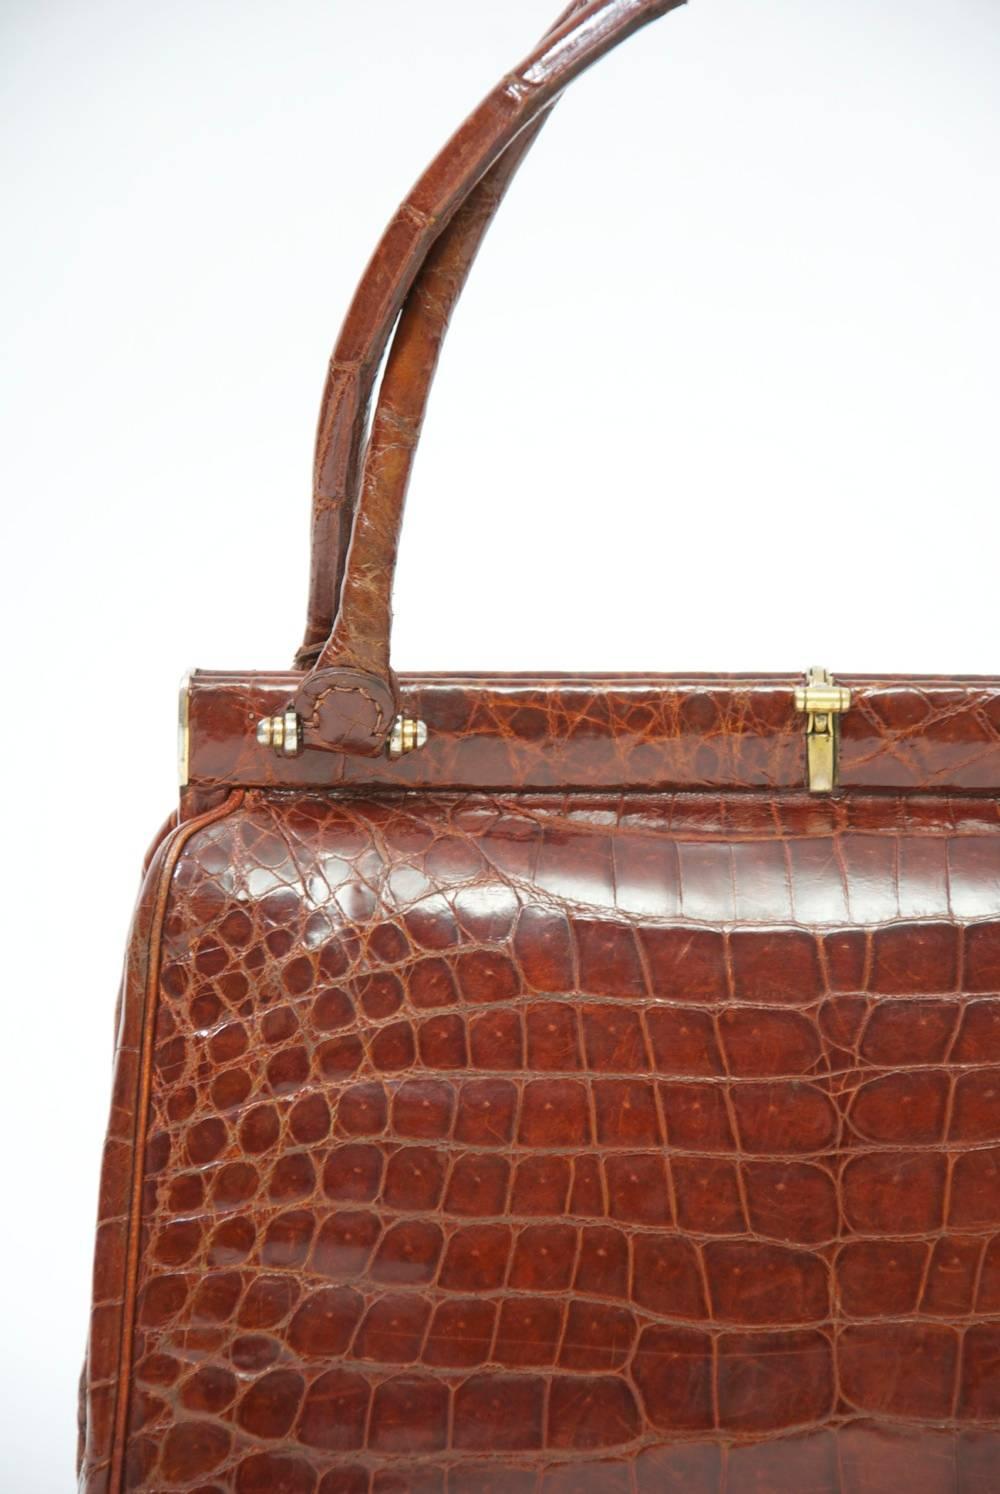 Classic 1960s handbag in cognac crocodile featuring a double handle and a discreet brass clasp. The interior, in matching leather, has open side compartments with snaps, and an additional zippered compartment on one side.